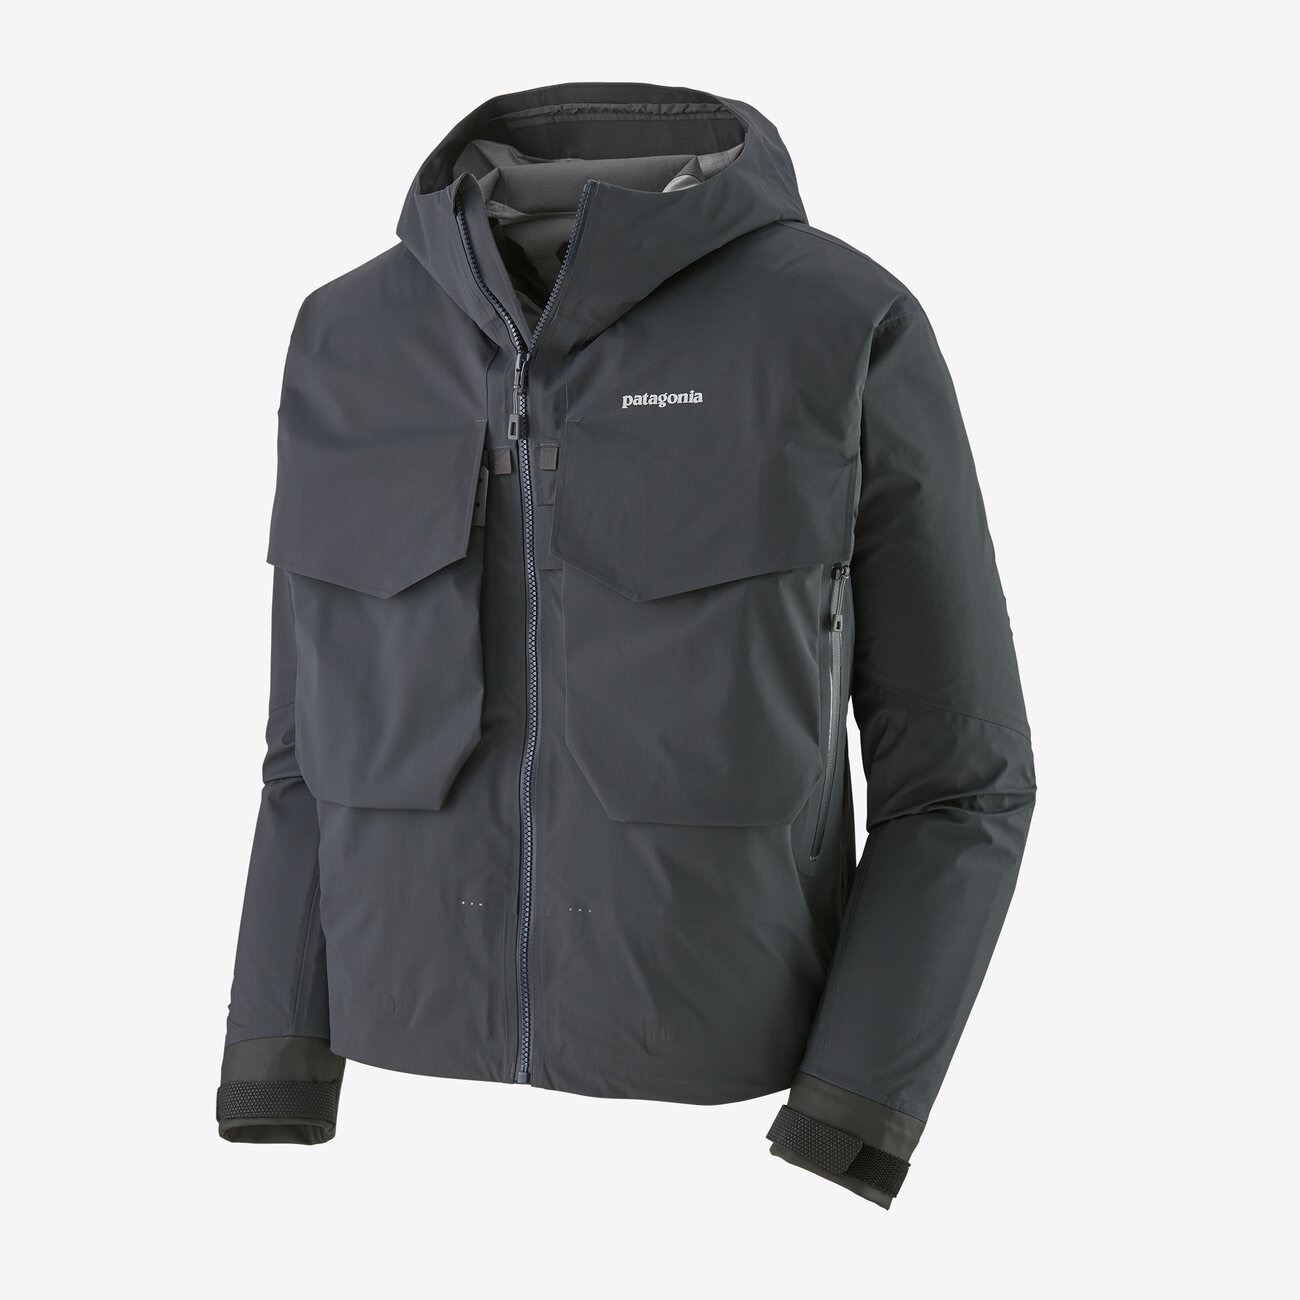 Patagonia M's SST Wading Jacket - Forge Grey - Small